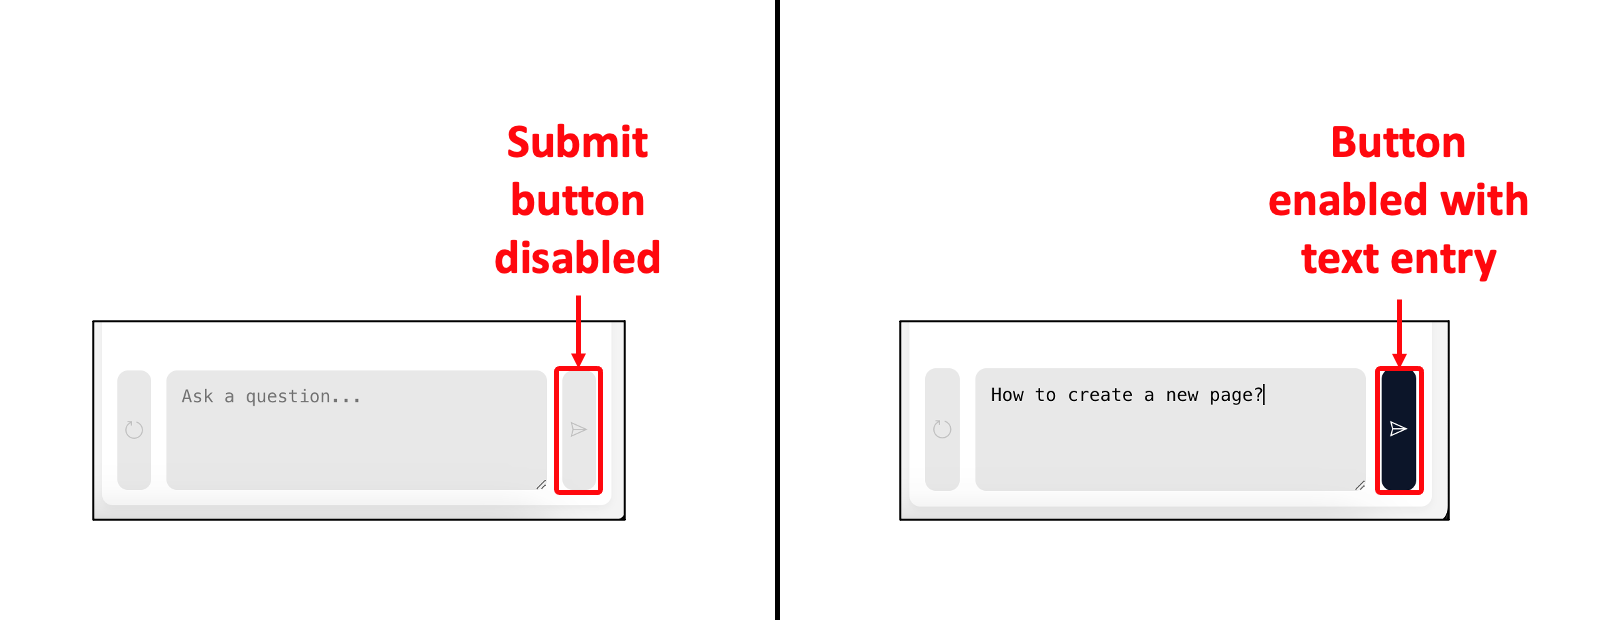 Image showing Submit button in different states